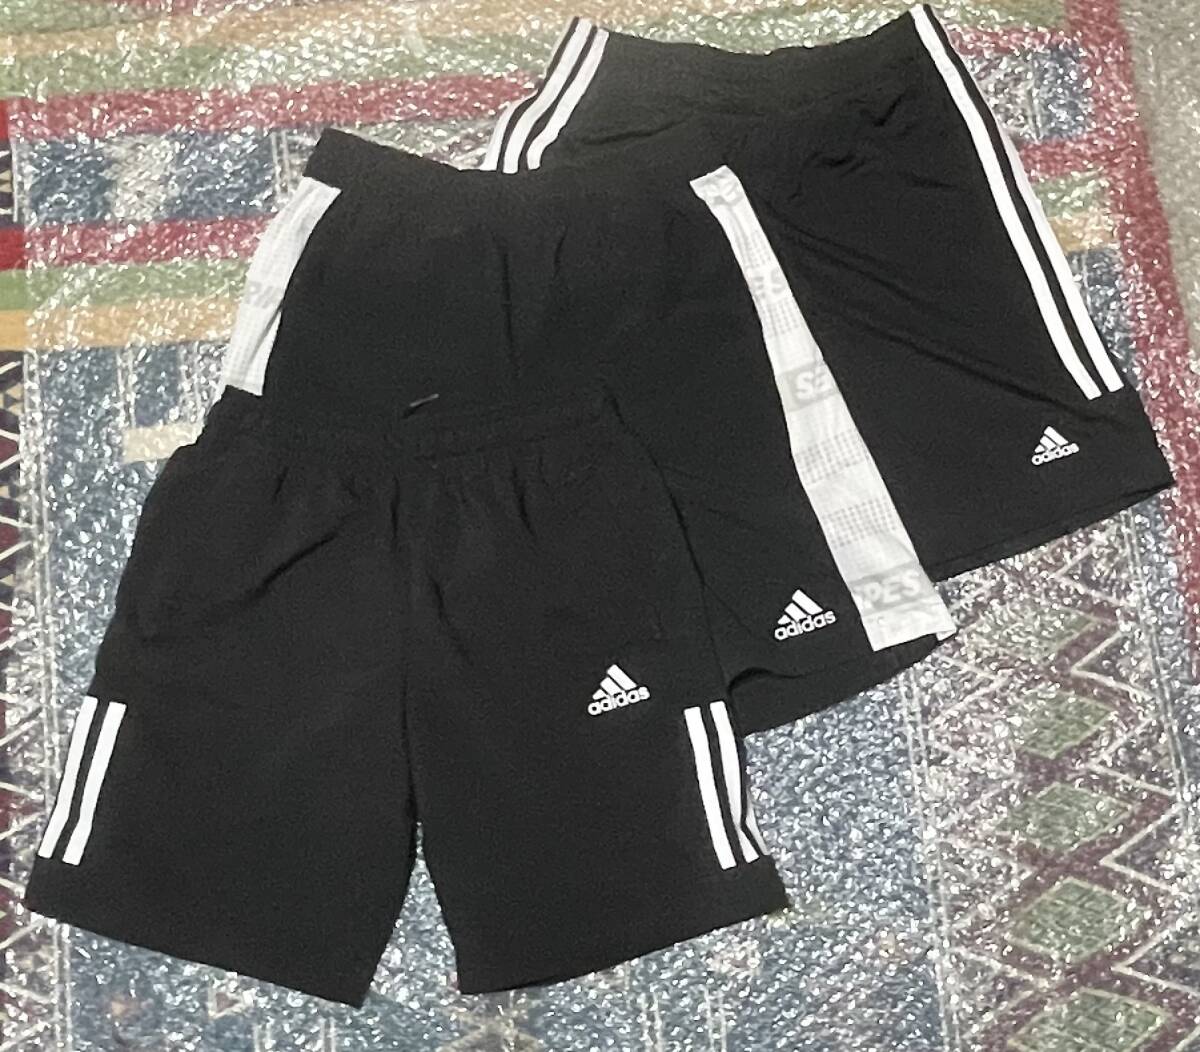  Adidas short pants x3 child clothes adidas short bread motion put on inspection ) jacket jersey NIKE uniform soccer sneakers shoes shoes 